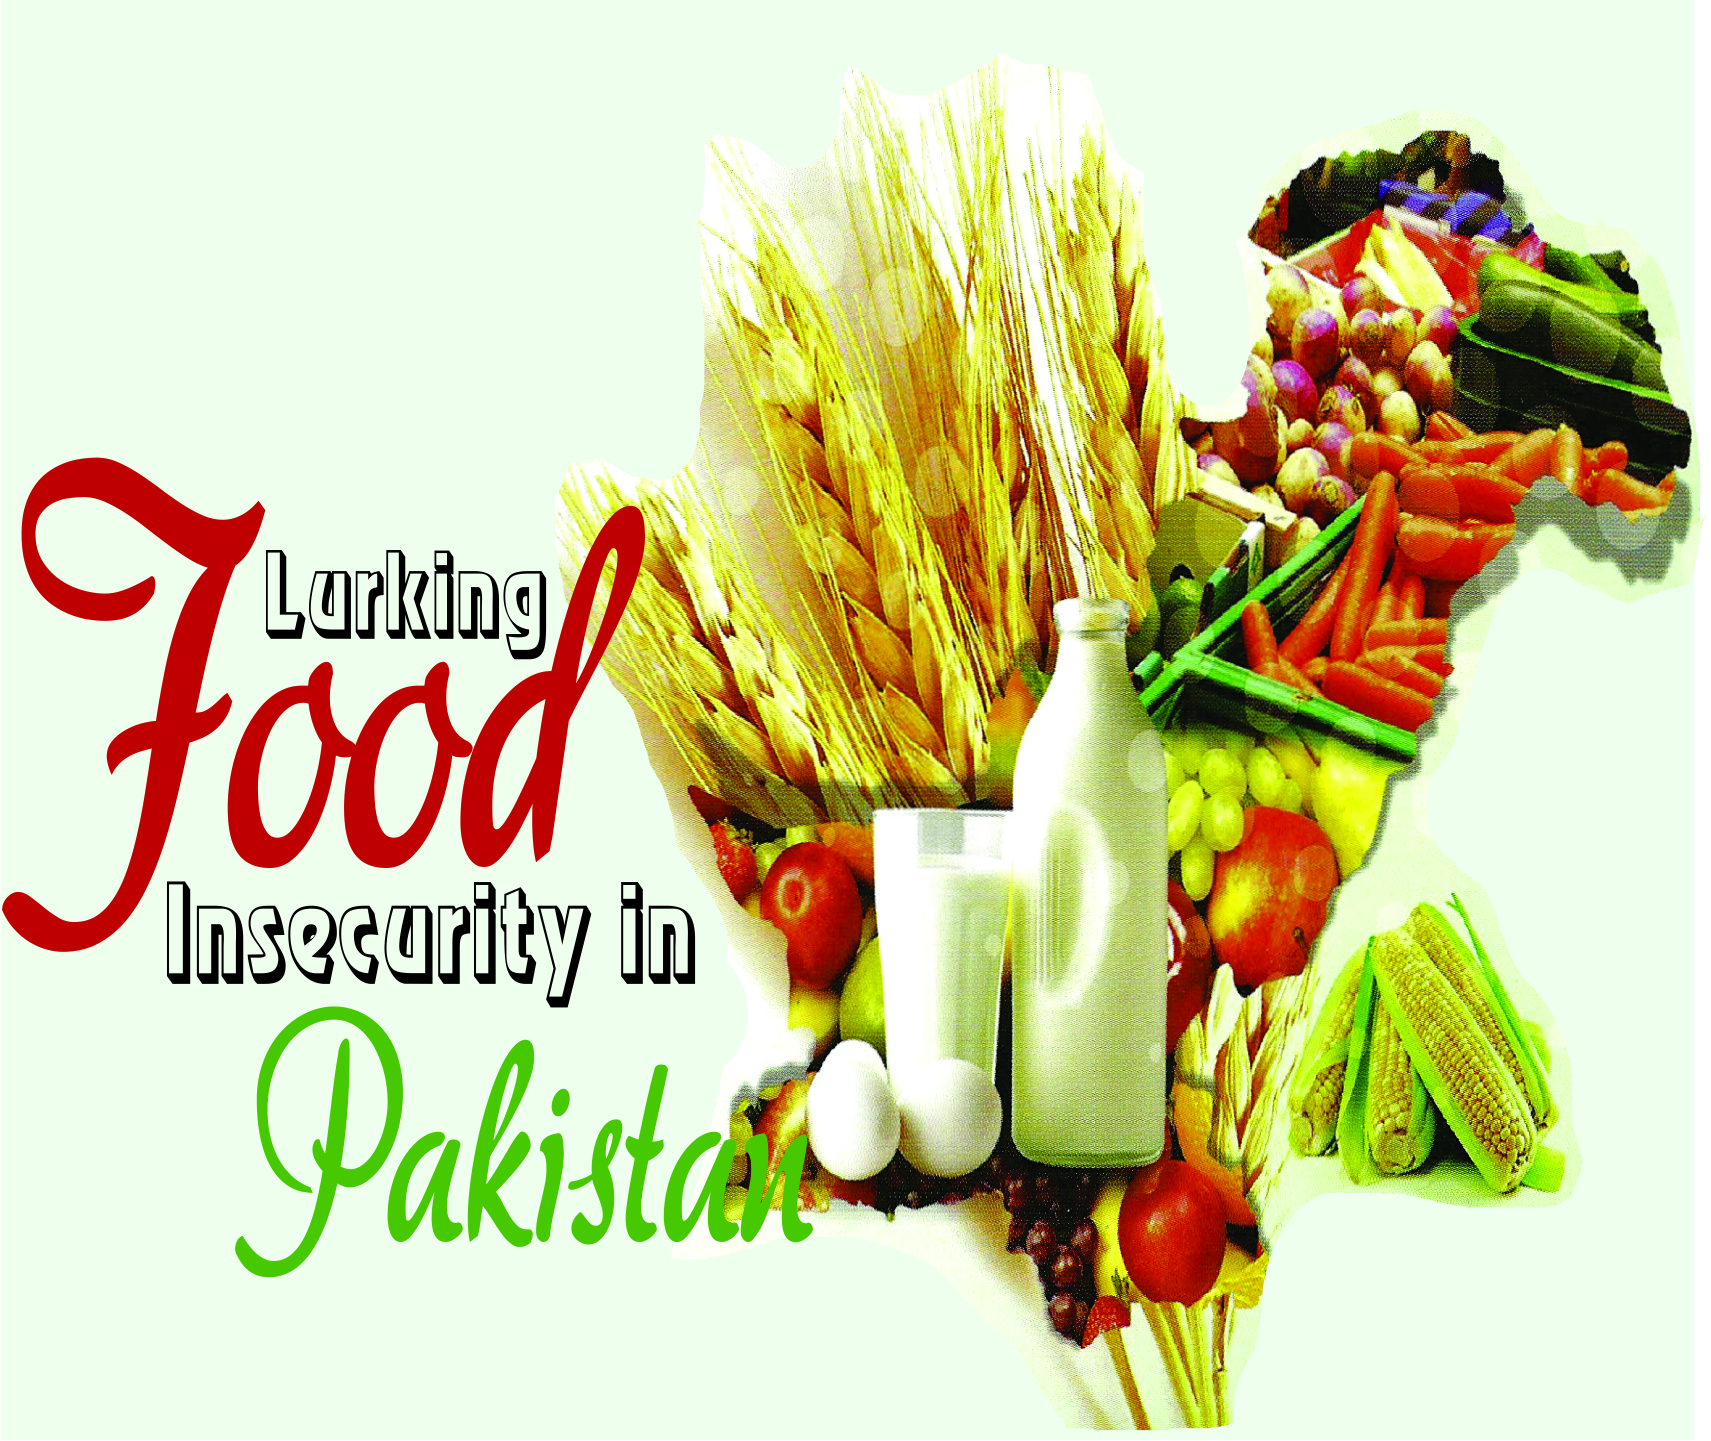 You are currently viewing Lurking Food Insecurity in Pakistan